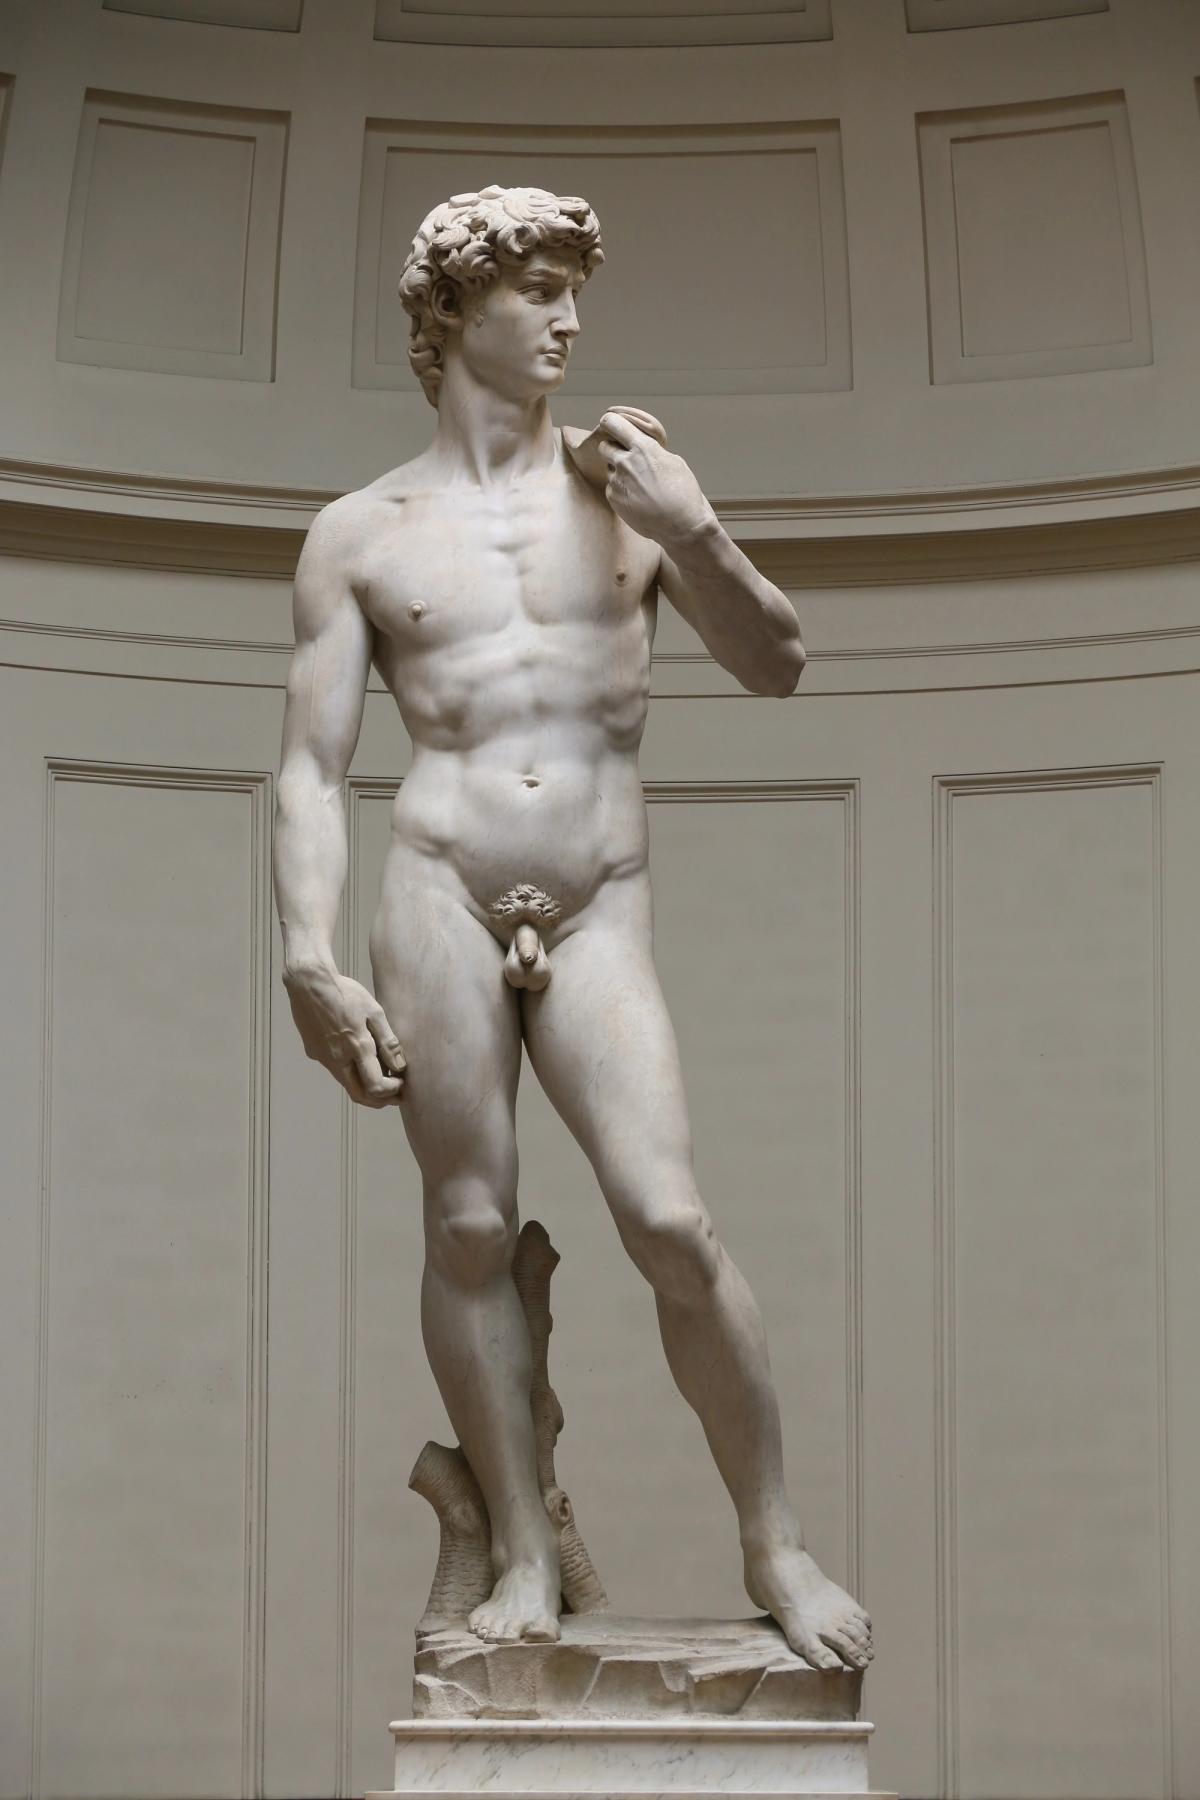 David (1501-04) by Michelangelo, seen in situ at the Galleria dell'Accademia di Firenze in Florence, Italy, is too hot for some Tallahassee parents Jörg Bittner Unna, via Wikimedia Commons